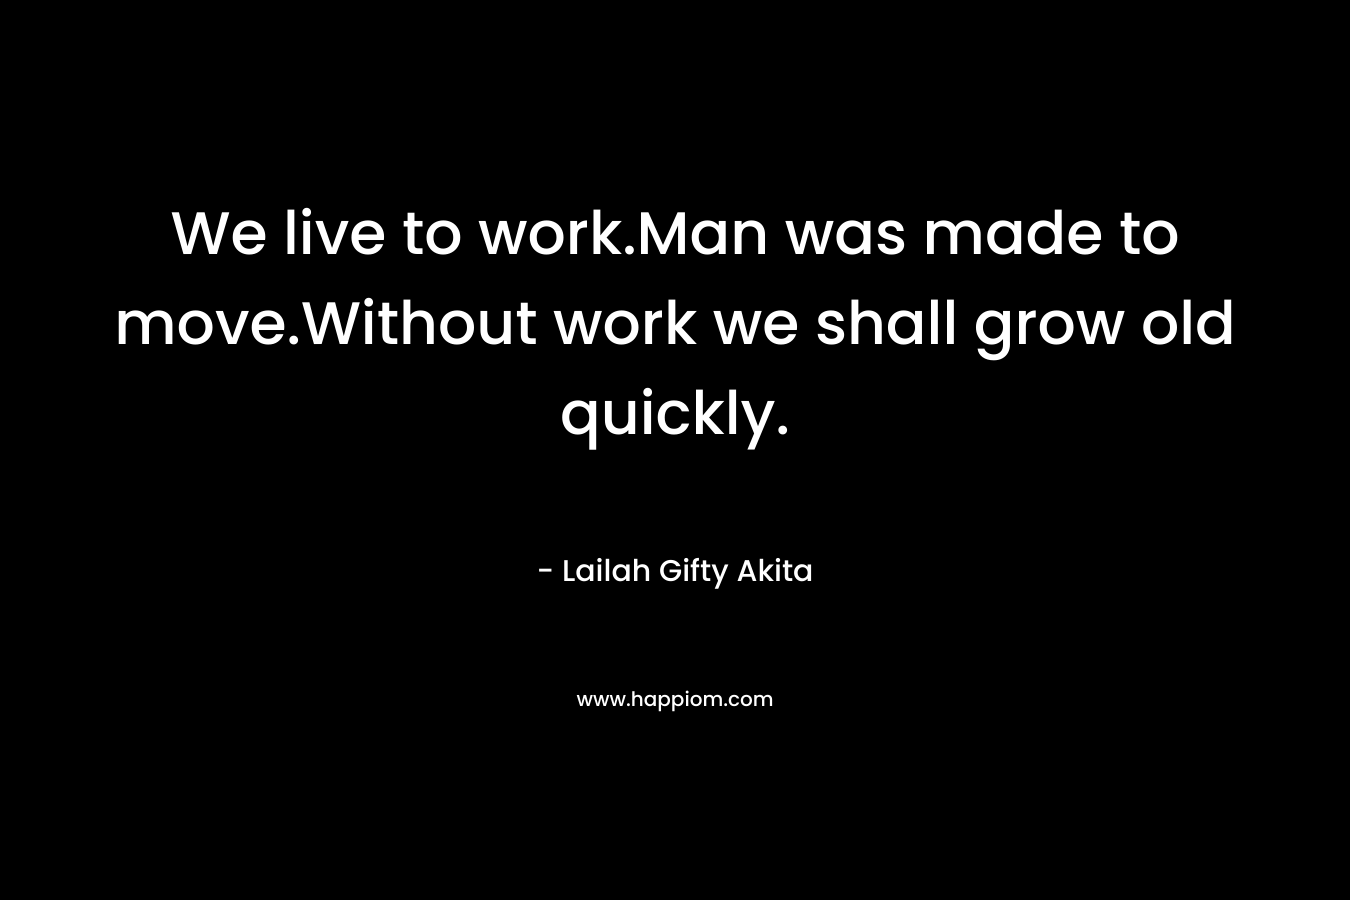 We live to work.Man was made to move.Without work we shall grow old quickly.